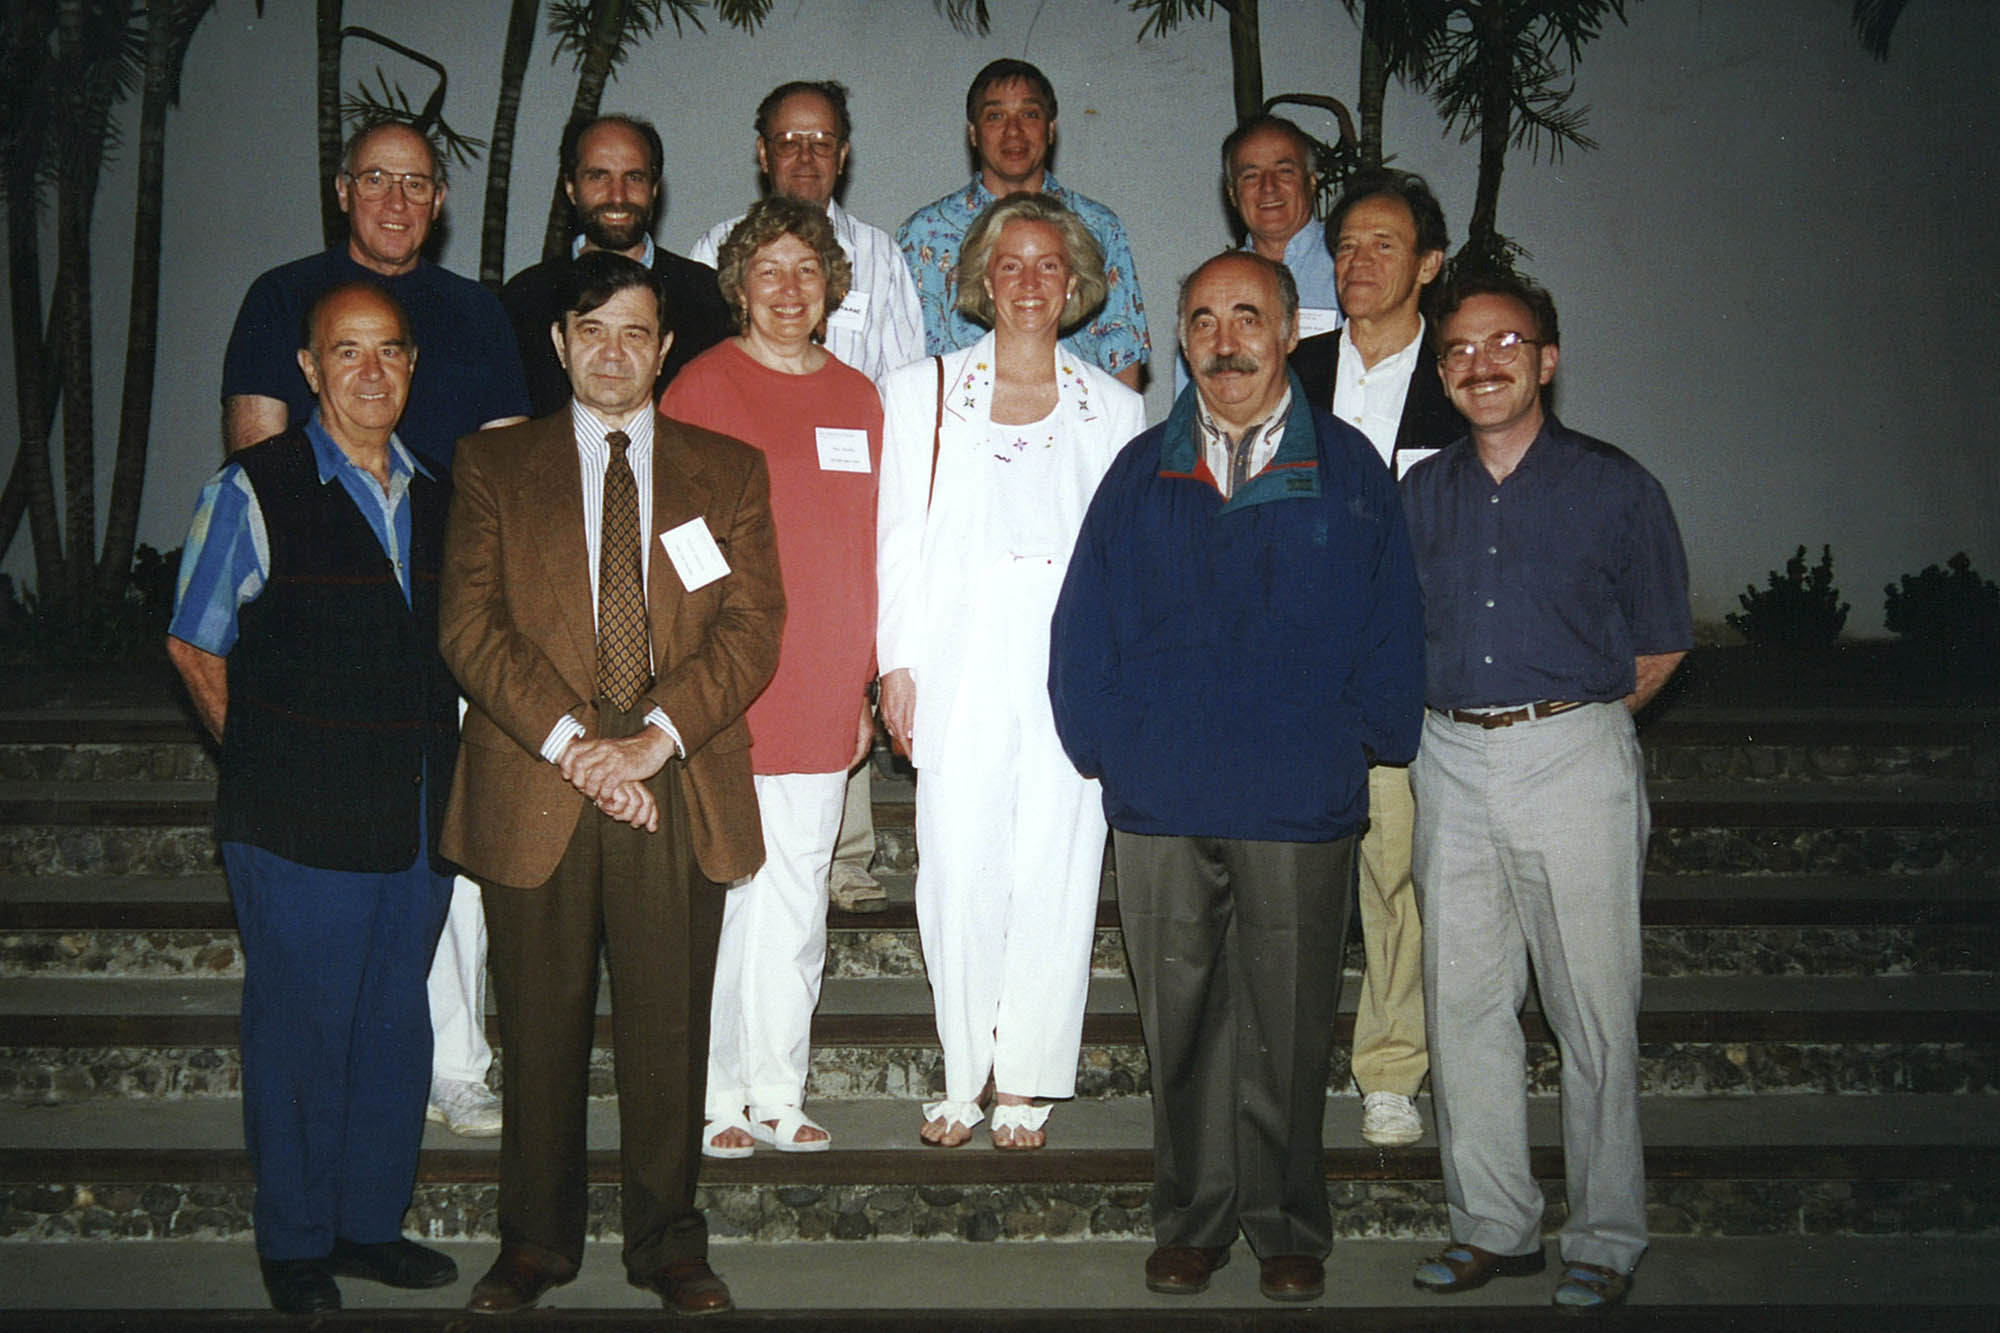 Rebecca Rimel, center, with Pew Scholars in Curacao, 1999.